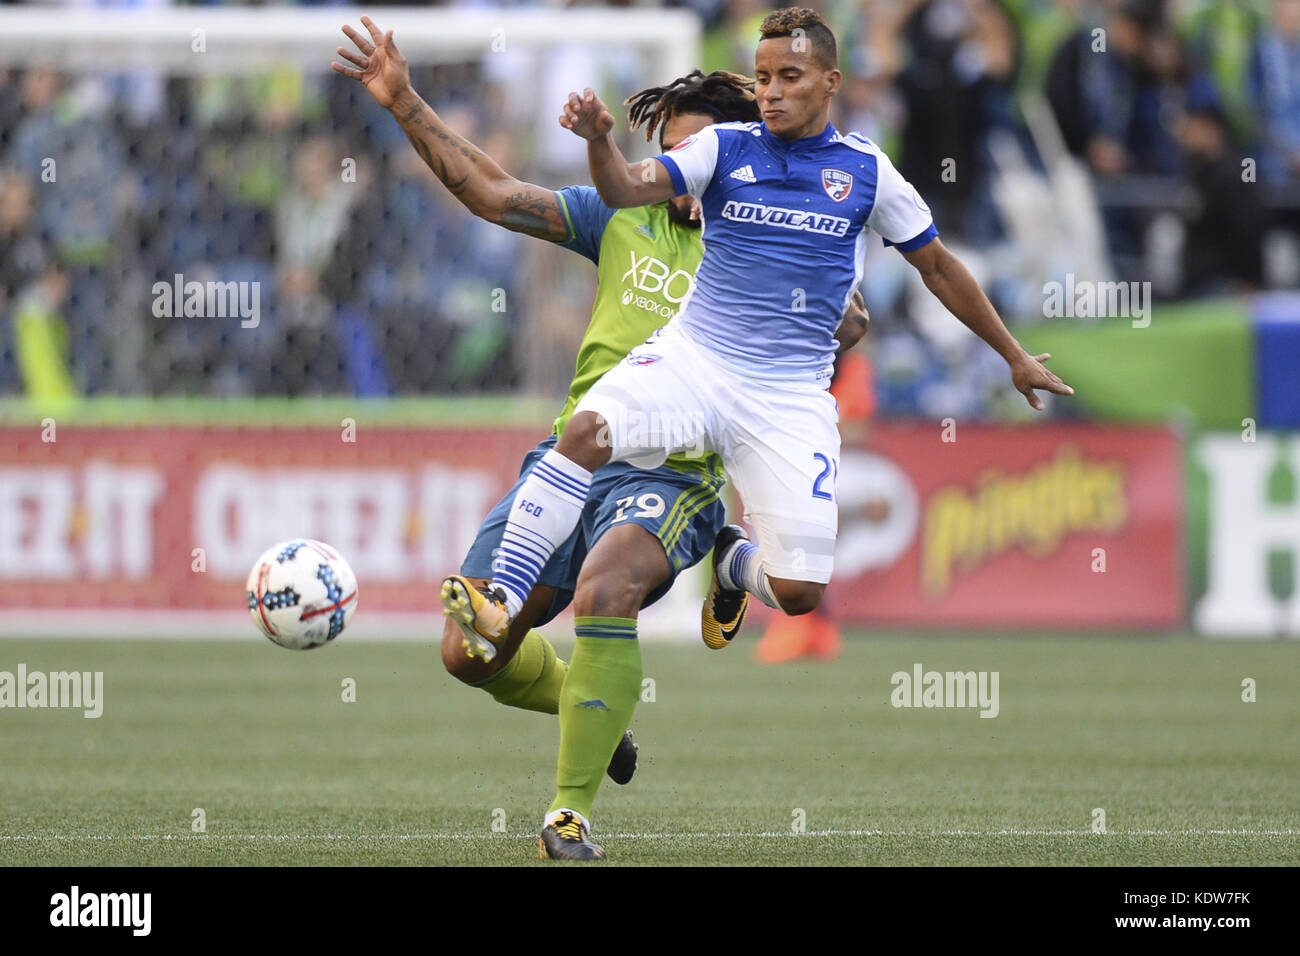 Seattle, Washington, USA. 15th Oct, 2017. Sounders defender ROMAN TORRES (29) challenges Dallas midfielder MICHAEL BARRIOS (21) as FC Dallas visits the Seattle Sounders for an MLS match at Century Link Field in Seattle, WA. Credit: Jeff Halstead/ZUMA Wire/Alamy Live News Stock Photo